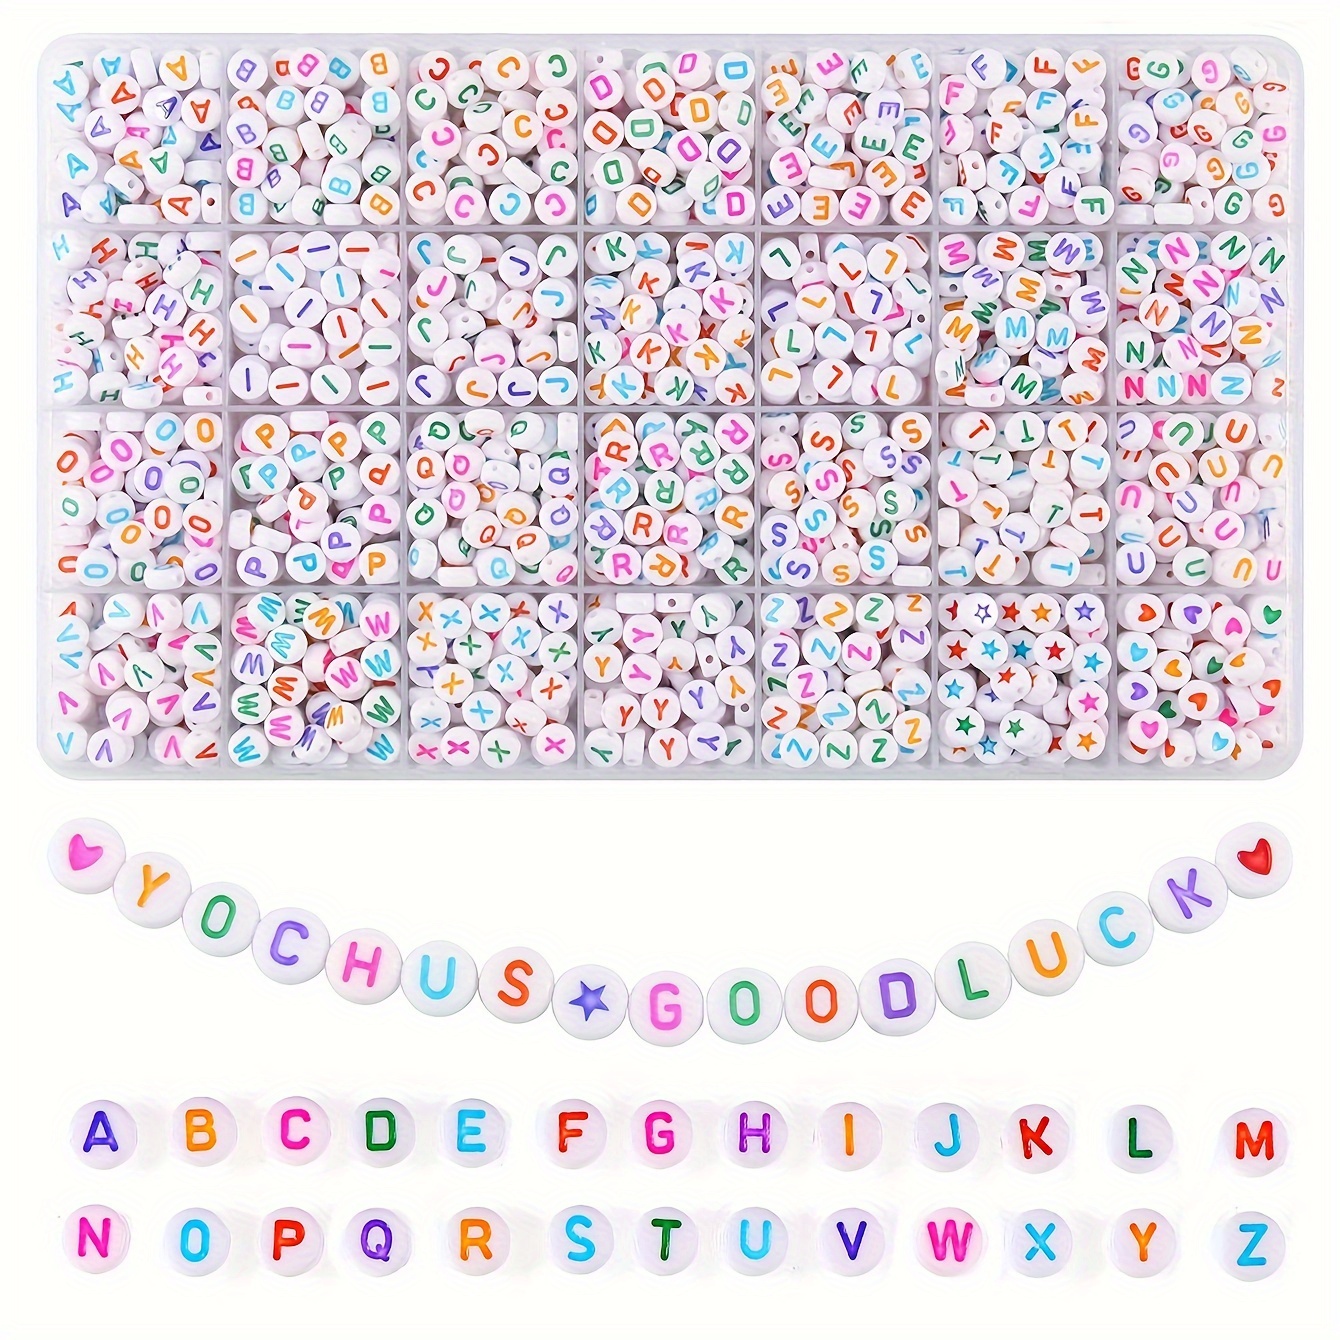 

840pcs Colorful Acrylic Alphabet Beads 4x7mm - A-z Letter & Heart Patterns For Diy Jewelry And Bracelet Crafting Essential For Handmade Projects